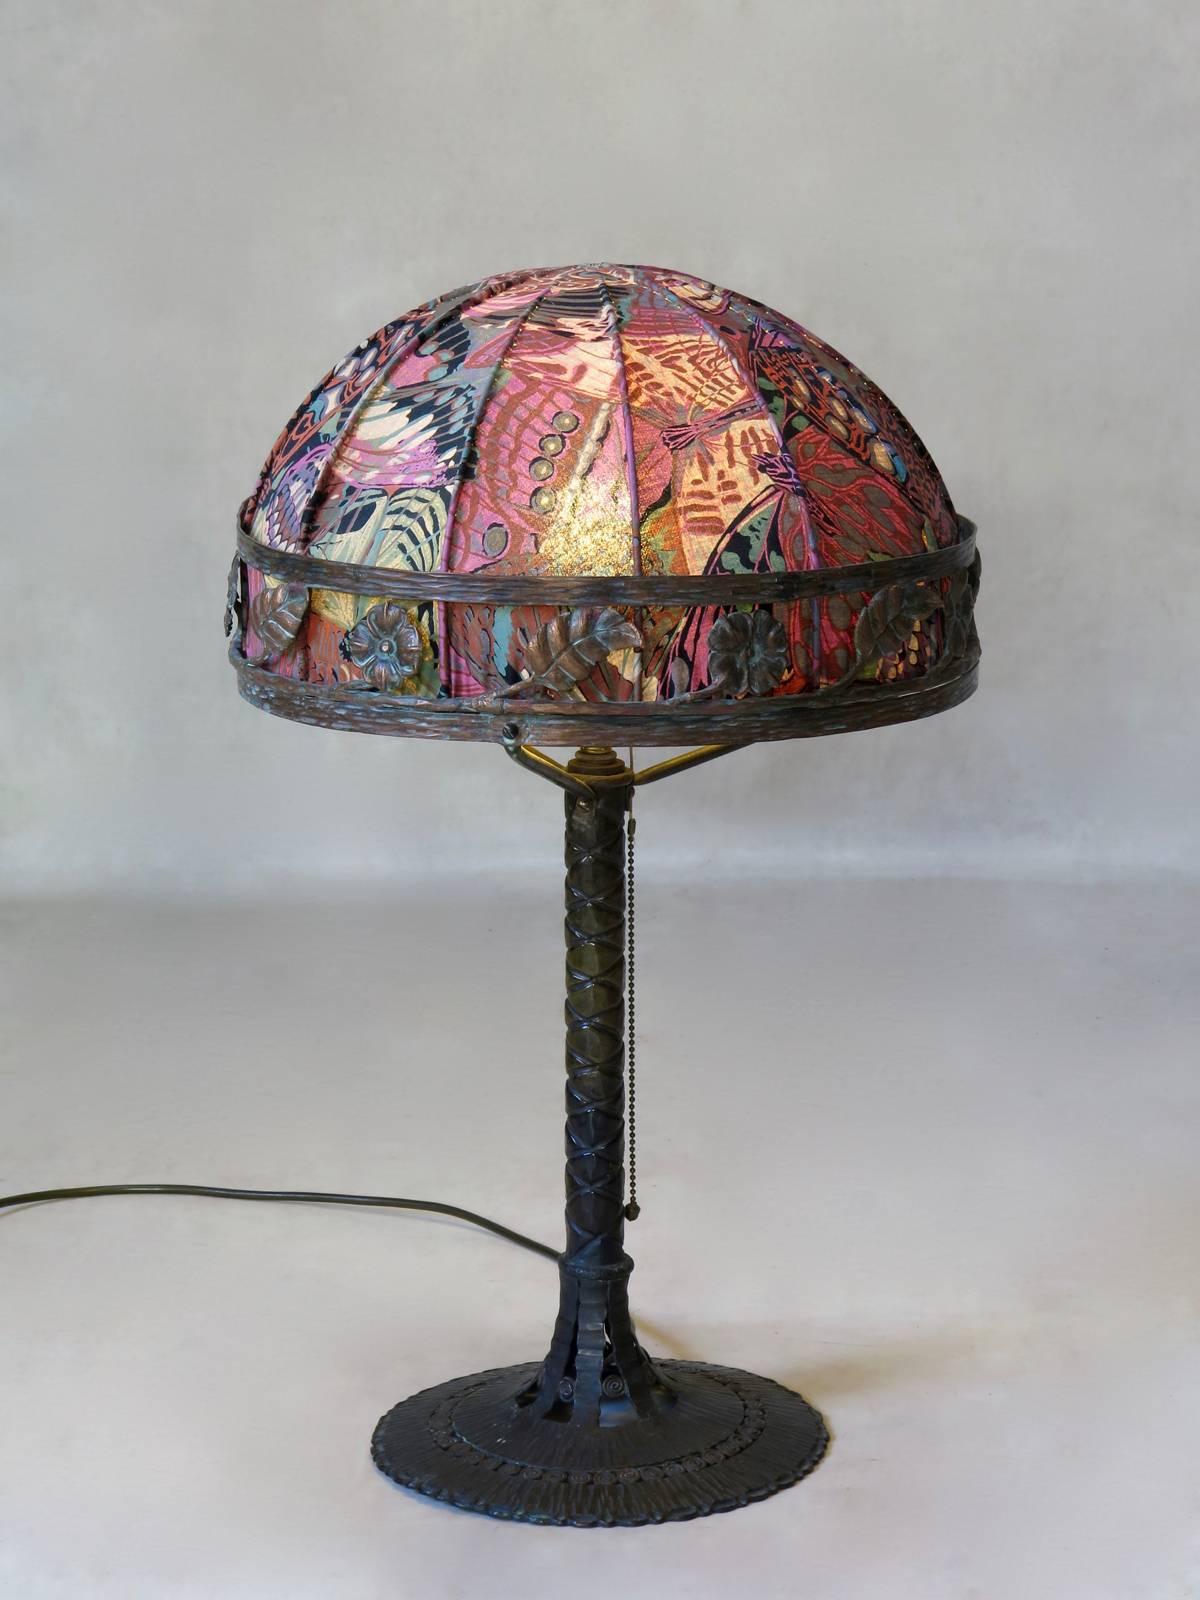 Very charming 1920s-1930s wrought iron Art Deco table lamp in the style of Edgar Brandt, Paul Kiss, etc. The stem is beautifully patinated and polished, with a palm tree-like pattern resting on a hammered iron circular base. The domed lampshade has